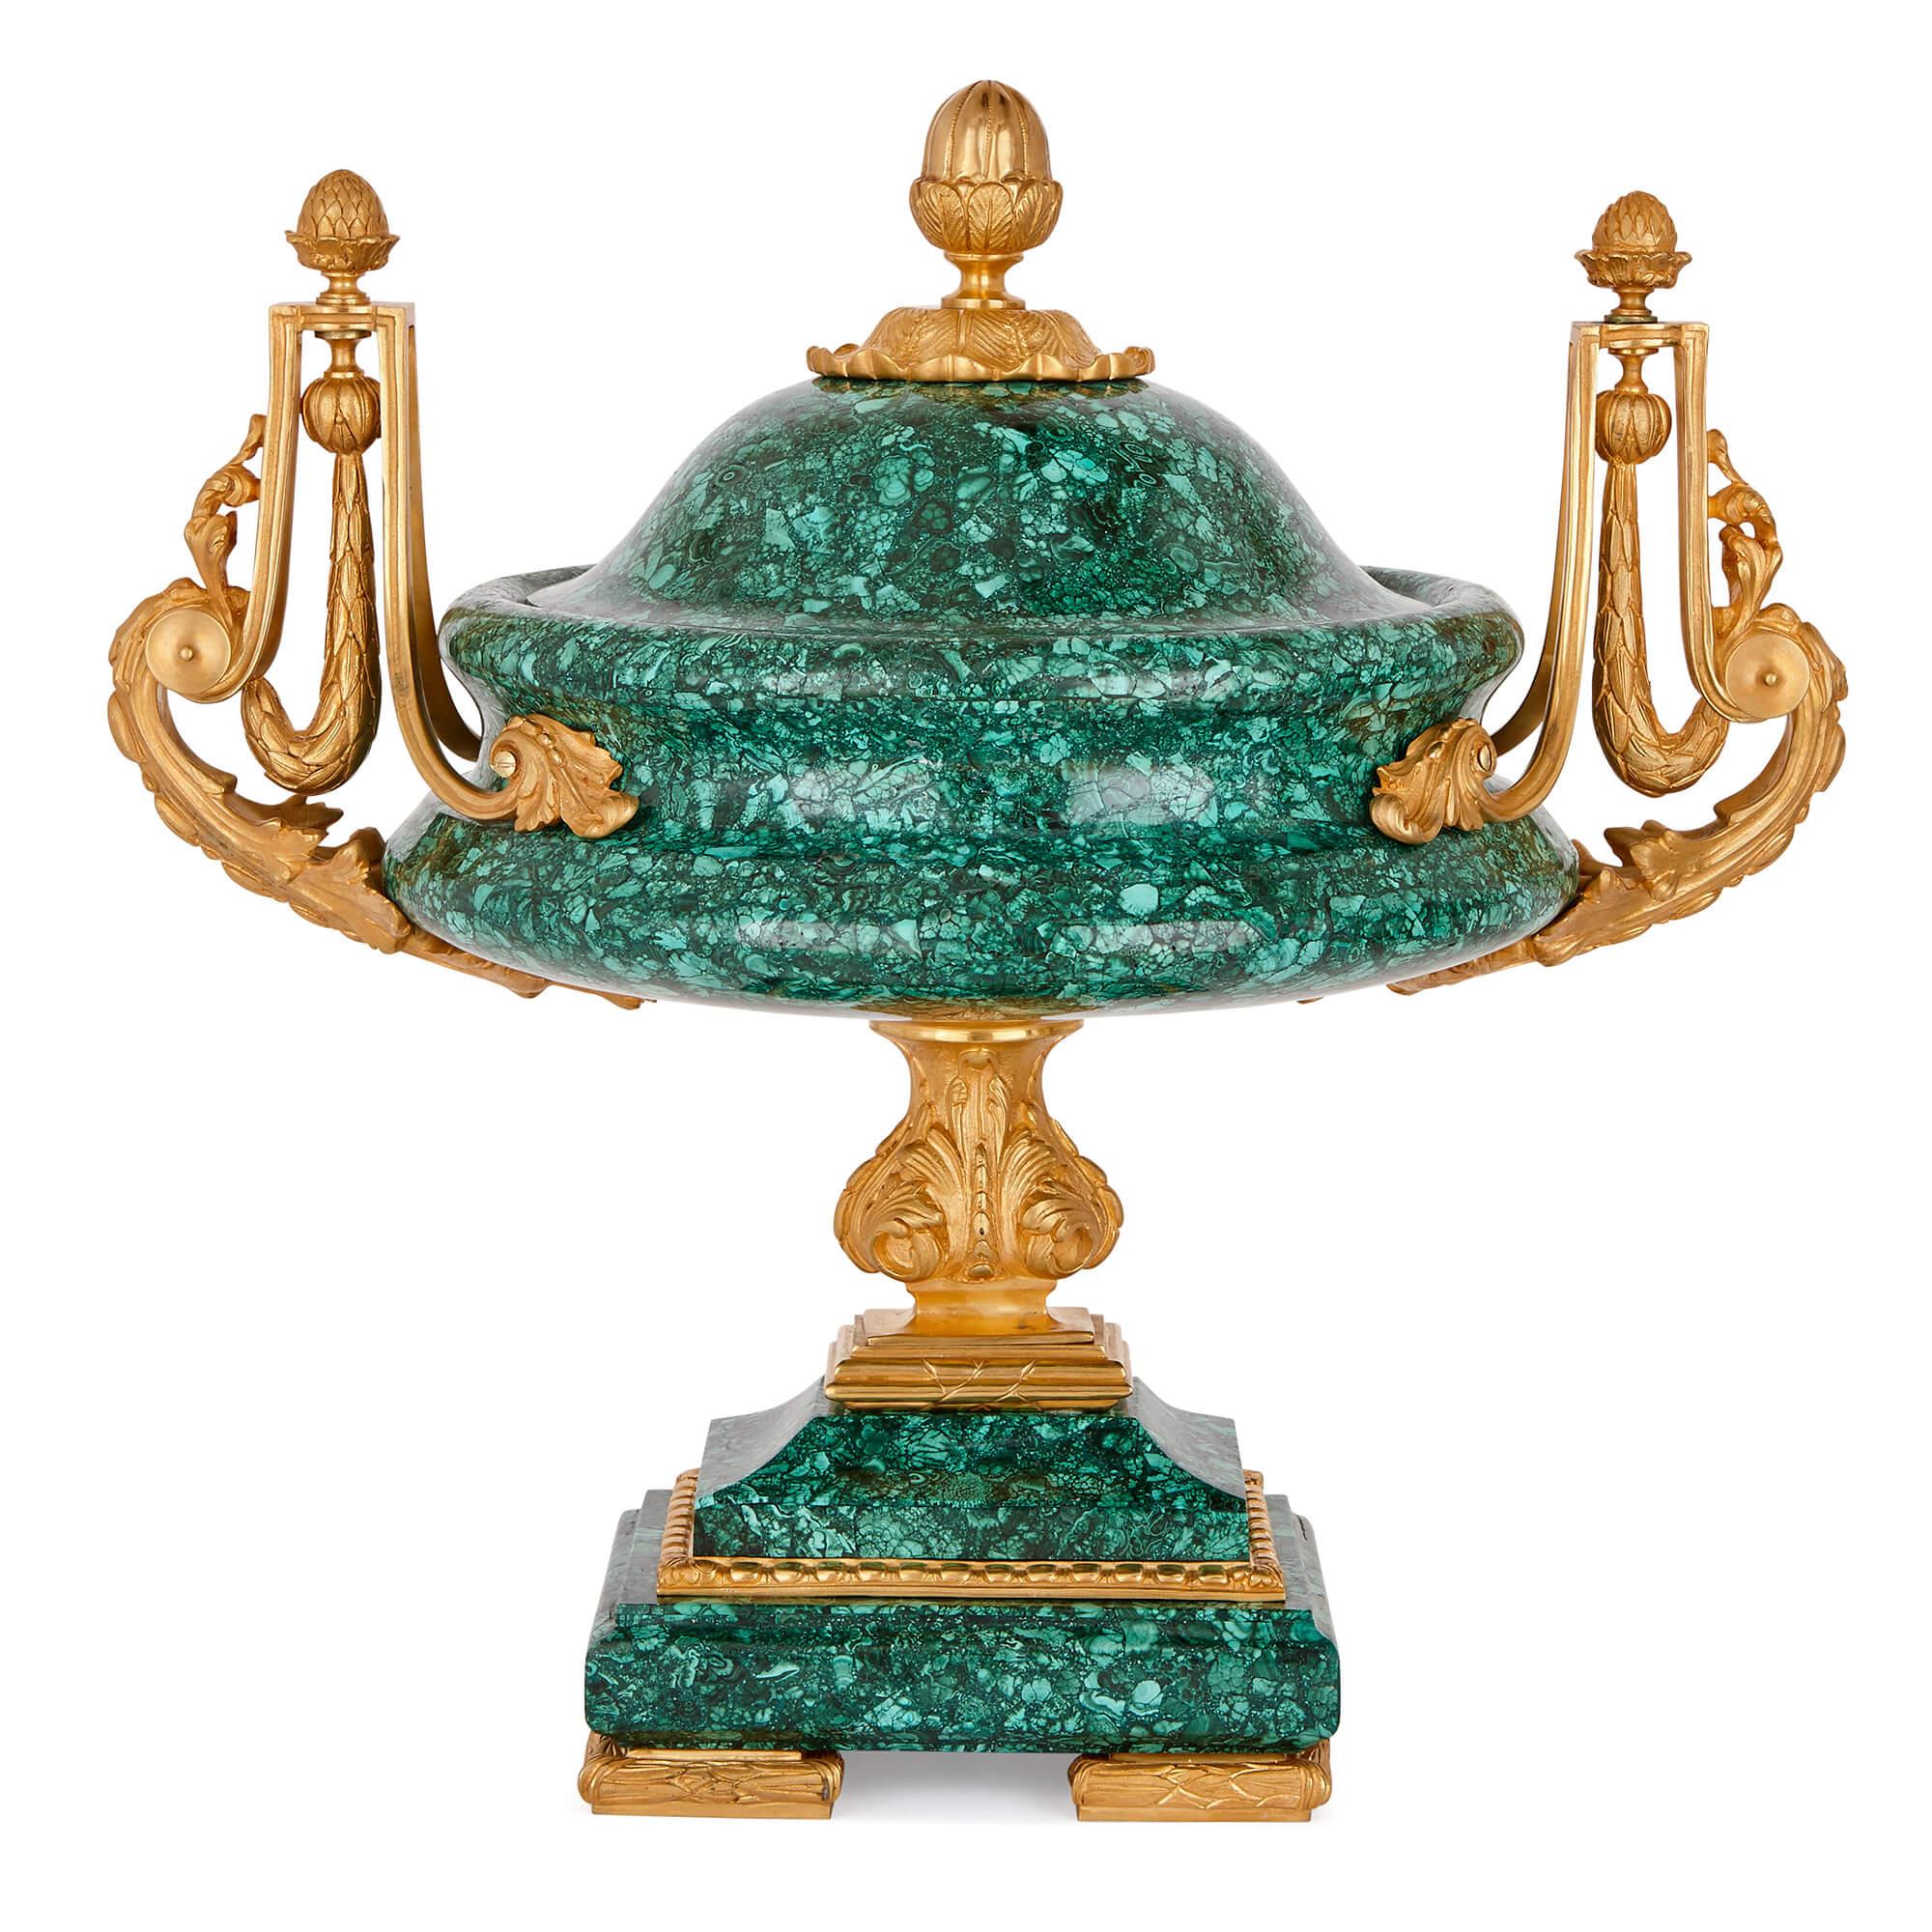 These vases are beautiful pieces of French design, originating from the late 19th Century, and more recently enhanced with vibrant veneers in the green gemstone, malachite.

The foot of each vase takes the form of a stepped malachite block, raised